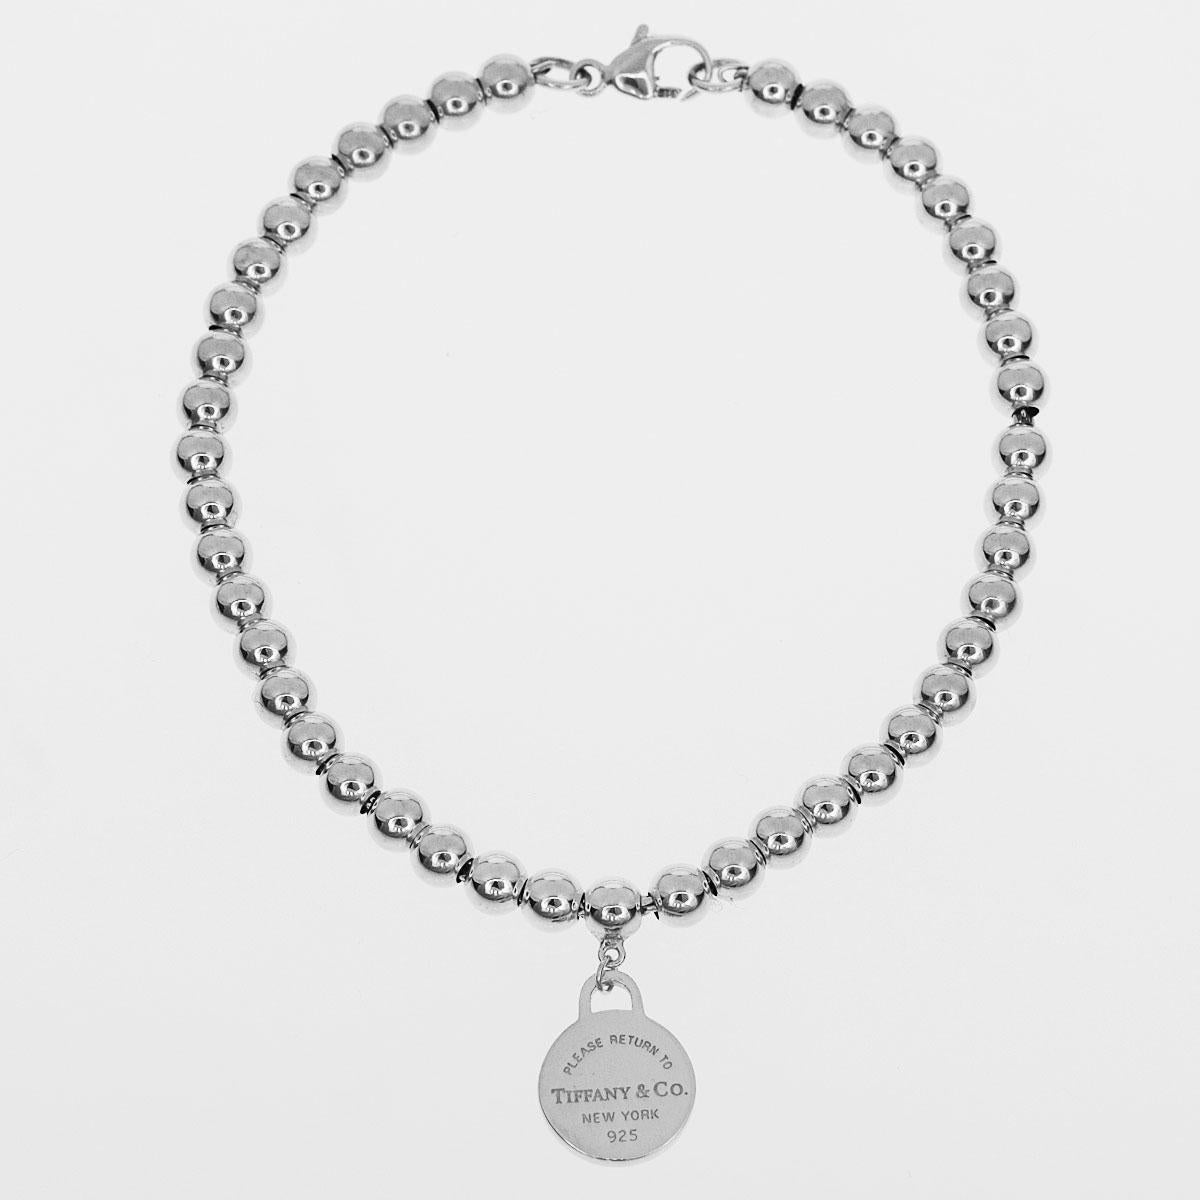 Brand:TIFFANY&Co.
Name:Return to Tiffany beads tag bracelet
Material:925  Sterling Silver
Weight:5.8g（Approx)
Band length(inch):18cm / 7.08in（Approx)
Width(inch):3.97mm / 0.15in（Approx)
Top size:Diameter  9.49mm / 0.37in（Approx)
Comes with:Tiffany